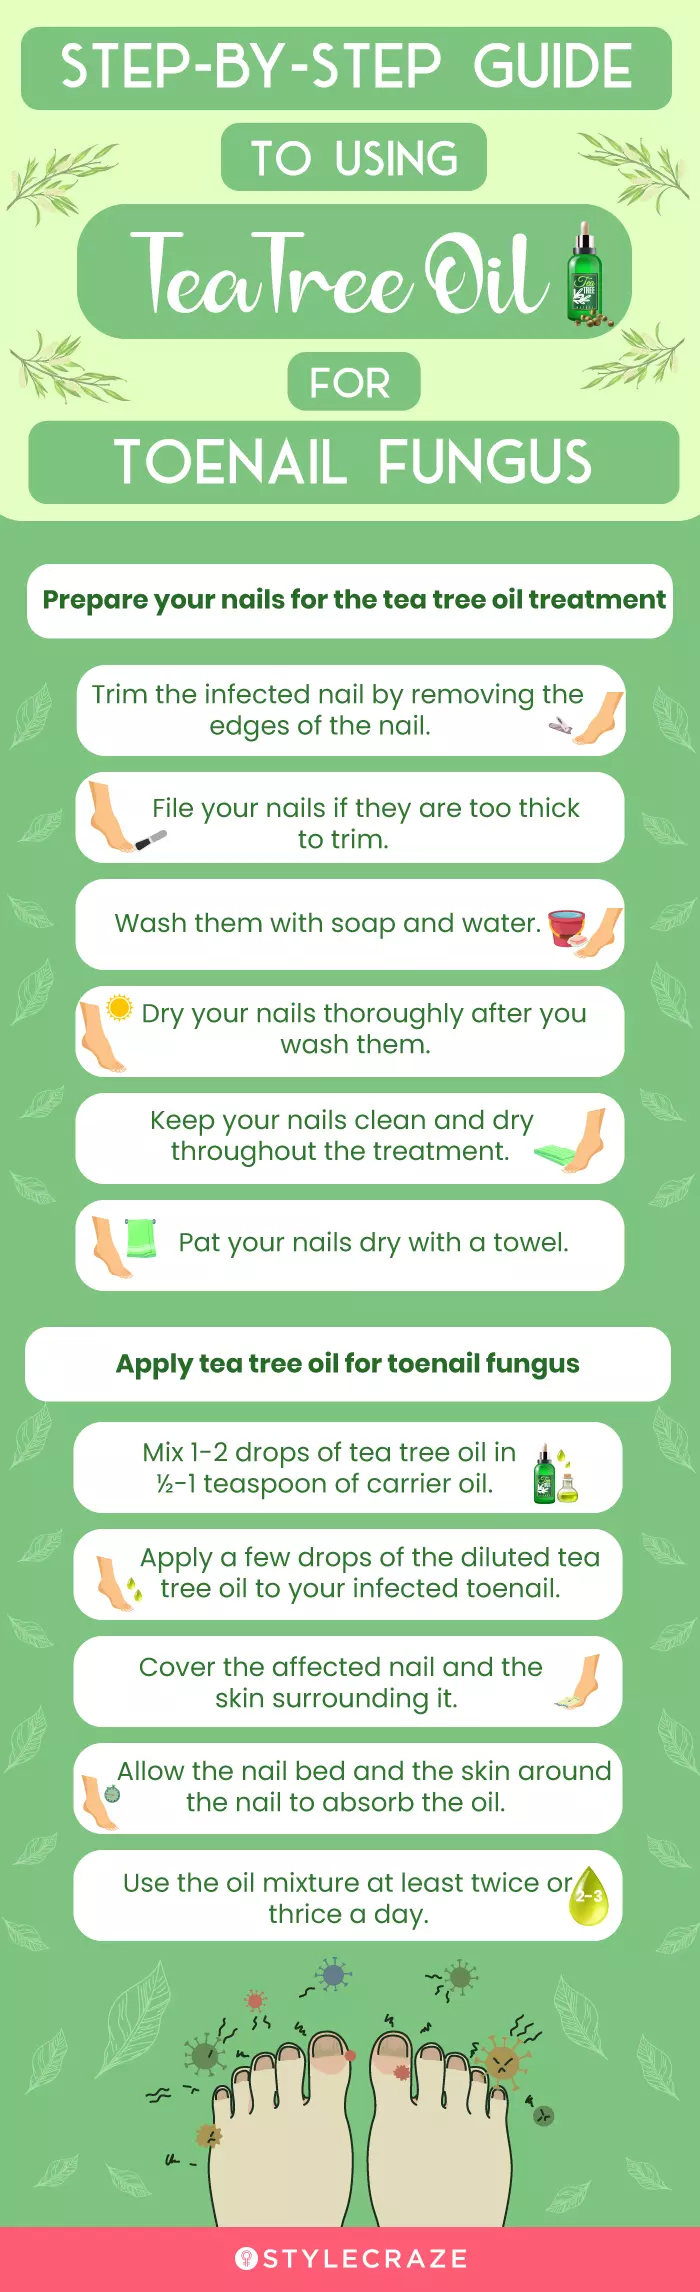 step-by-step guide to using tea tree oil for toenail fungus (infographic)